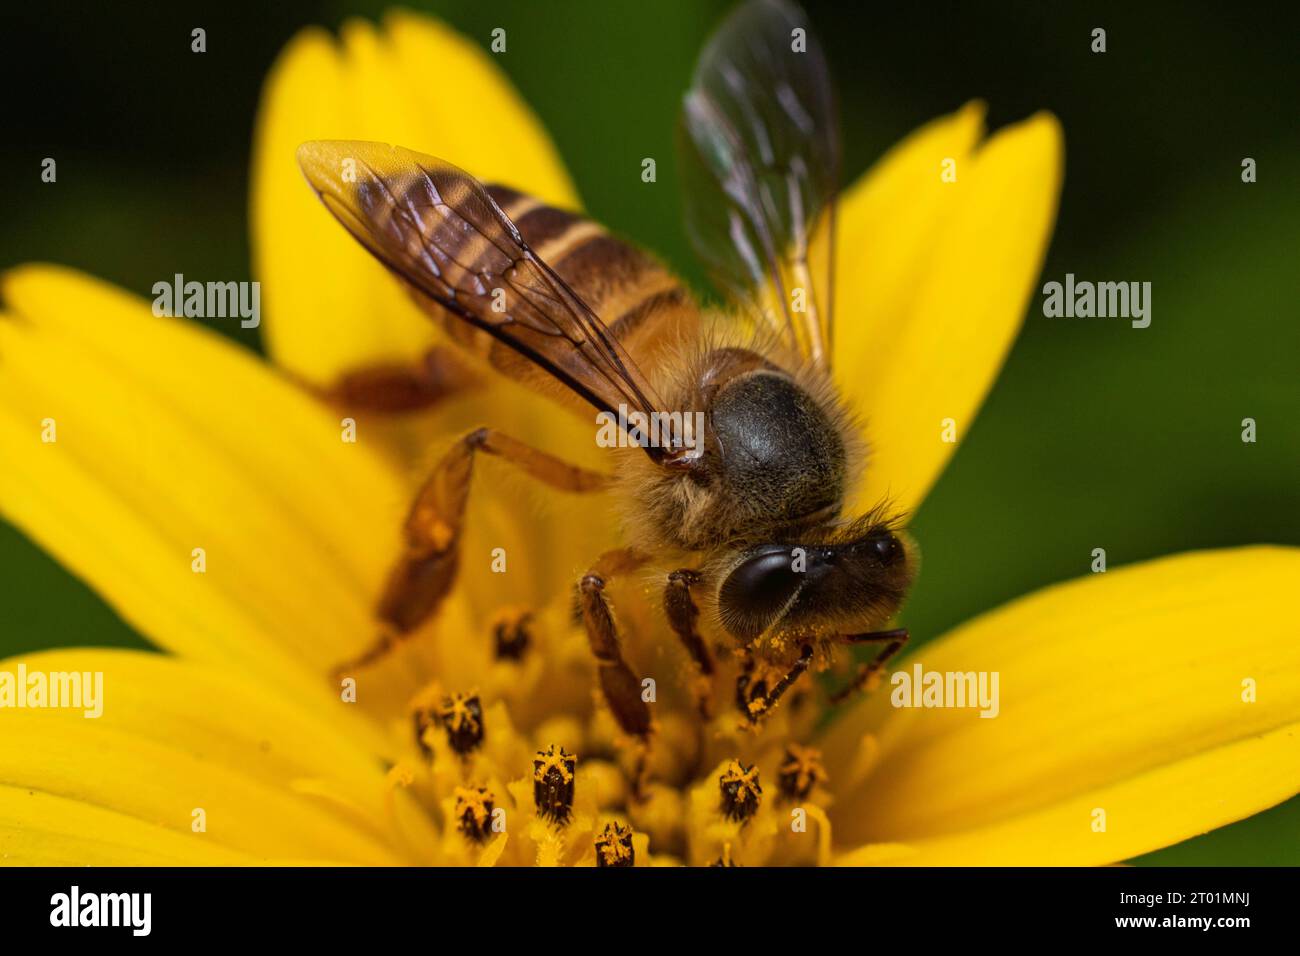 A honey bee is spotted eating some nectar of yellow wedelia flower under a macro photography style taken in Karangasem, Bali Indonesia Stock Photo